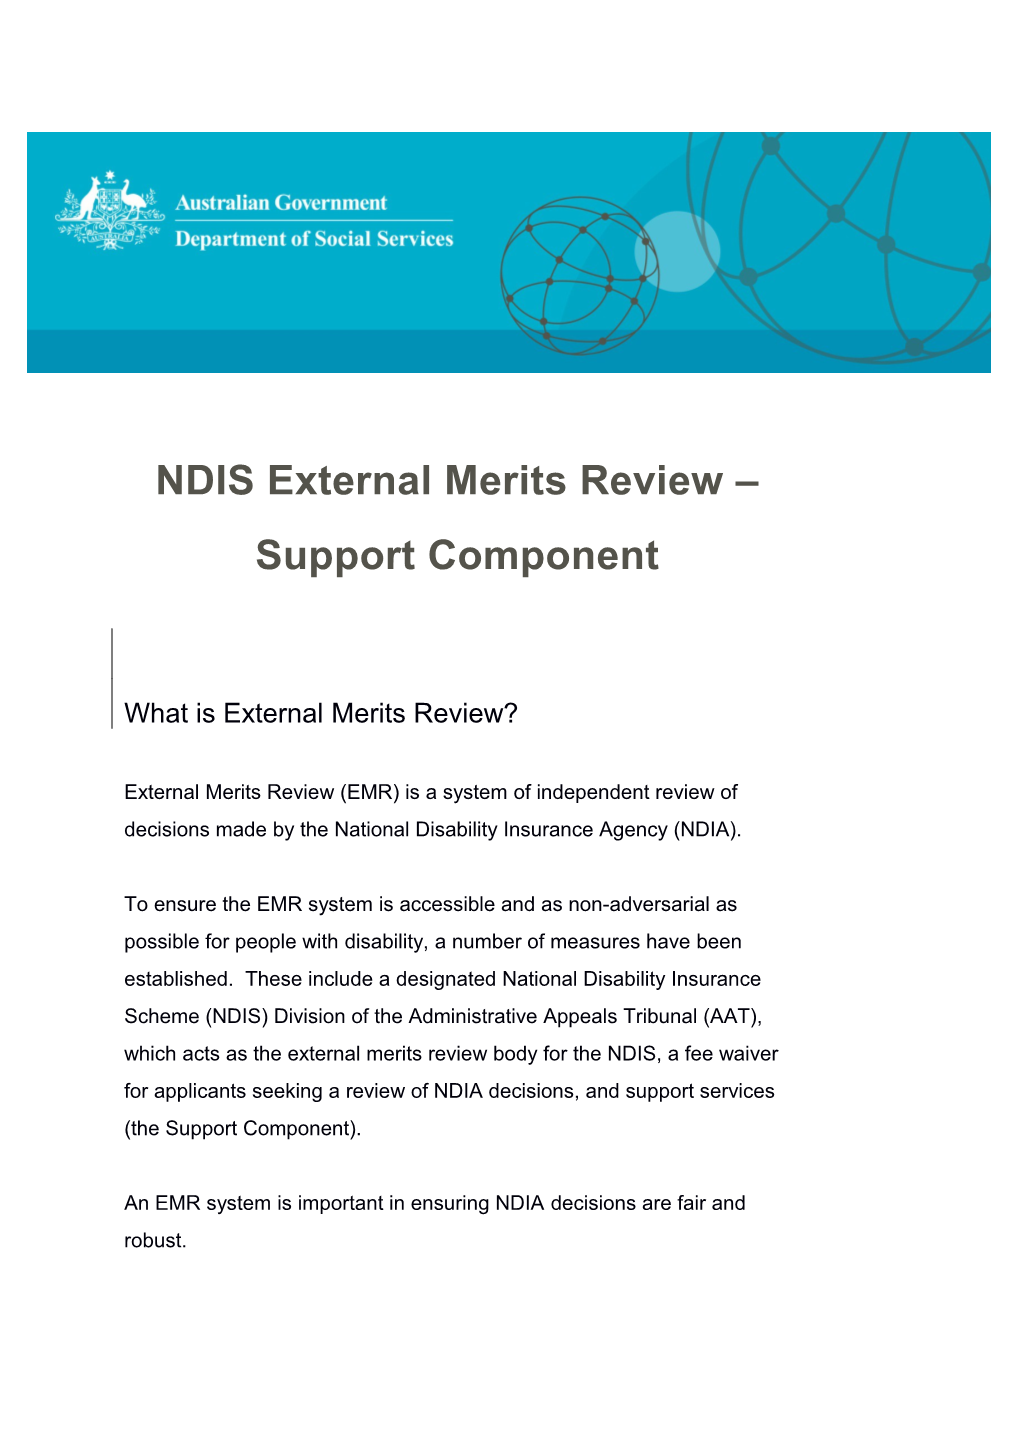 NDIS External Merits Review Support Component